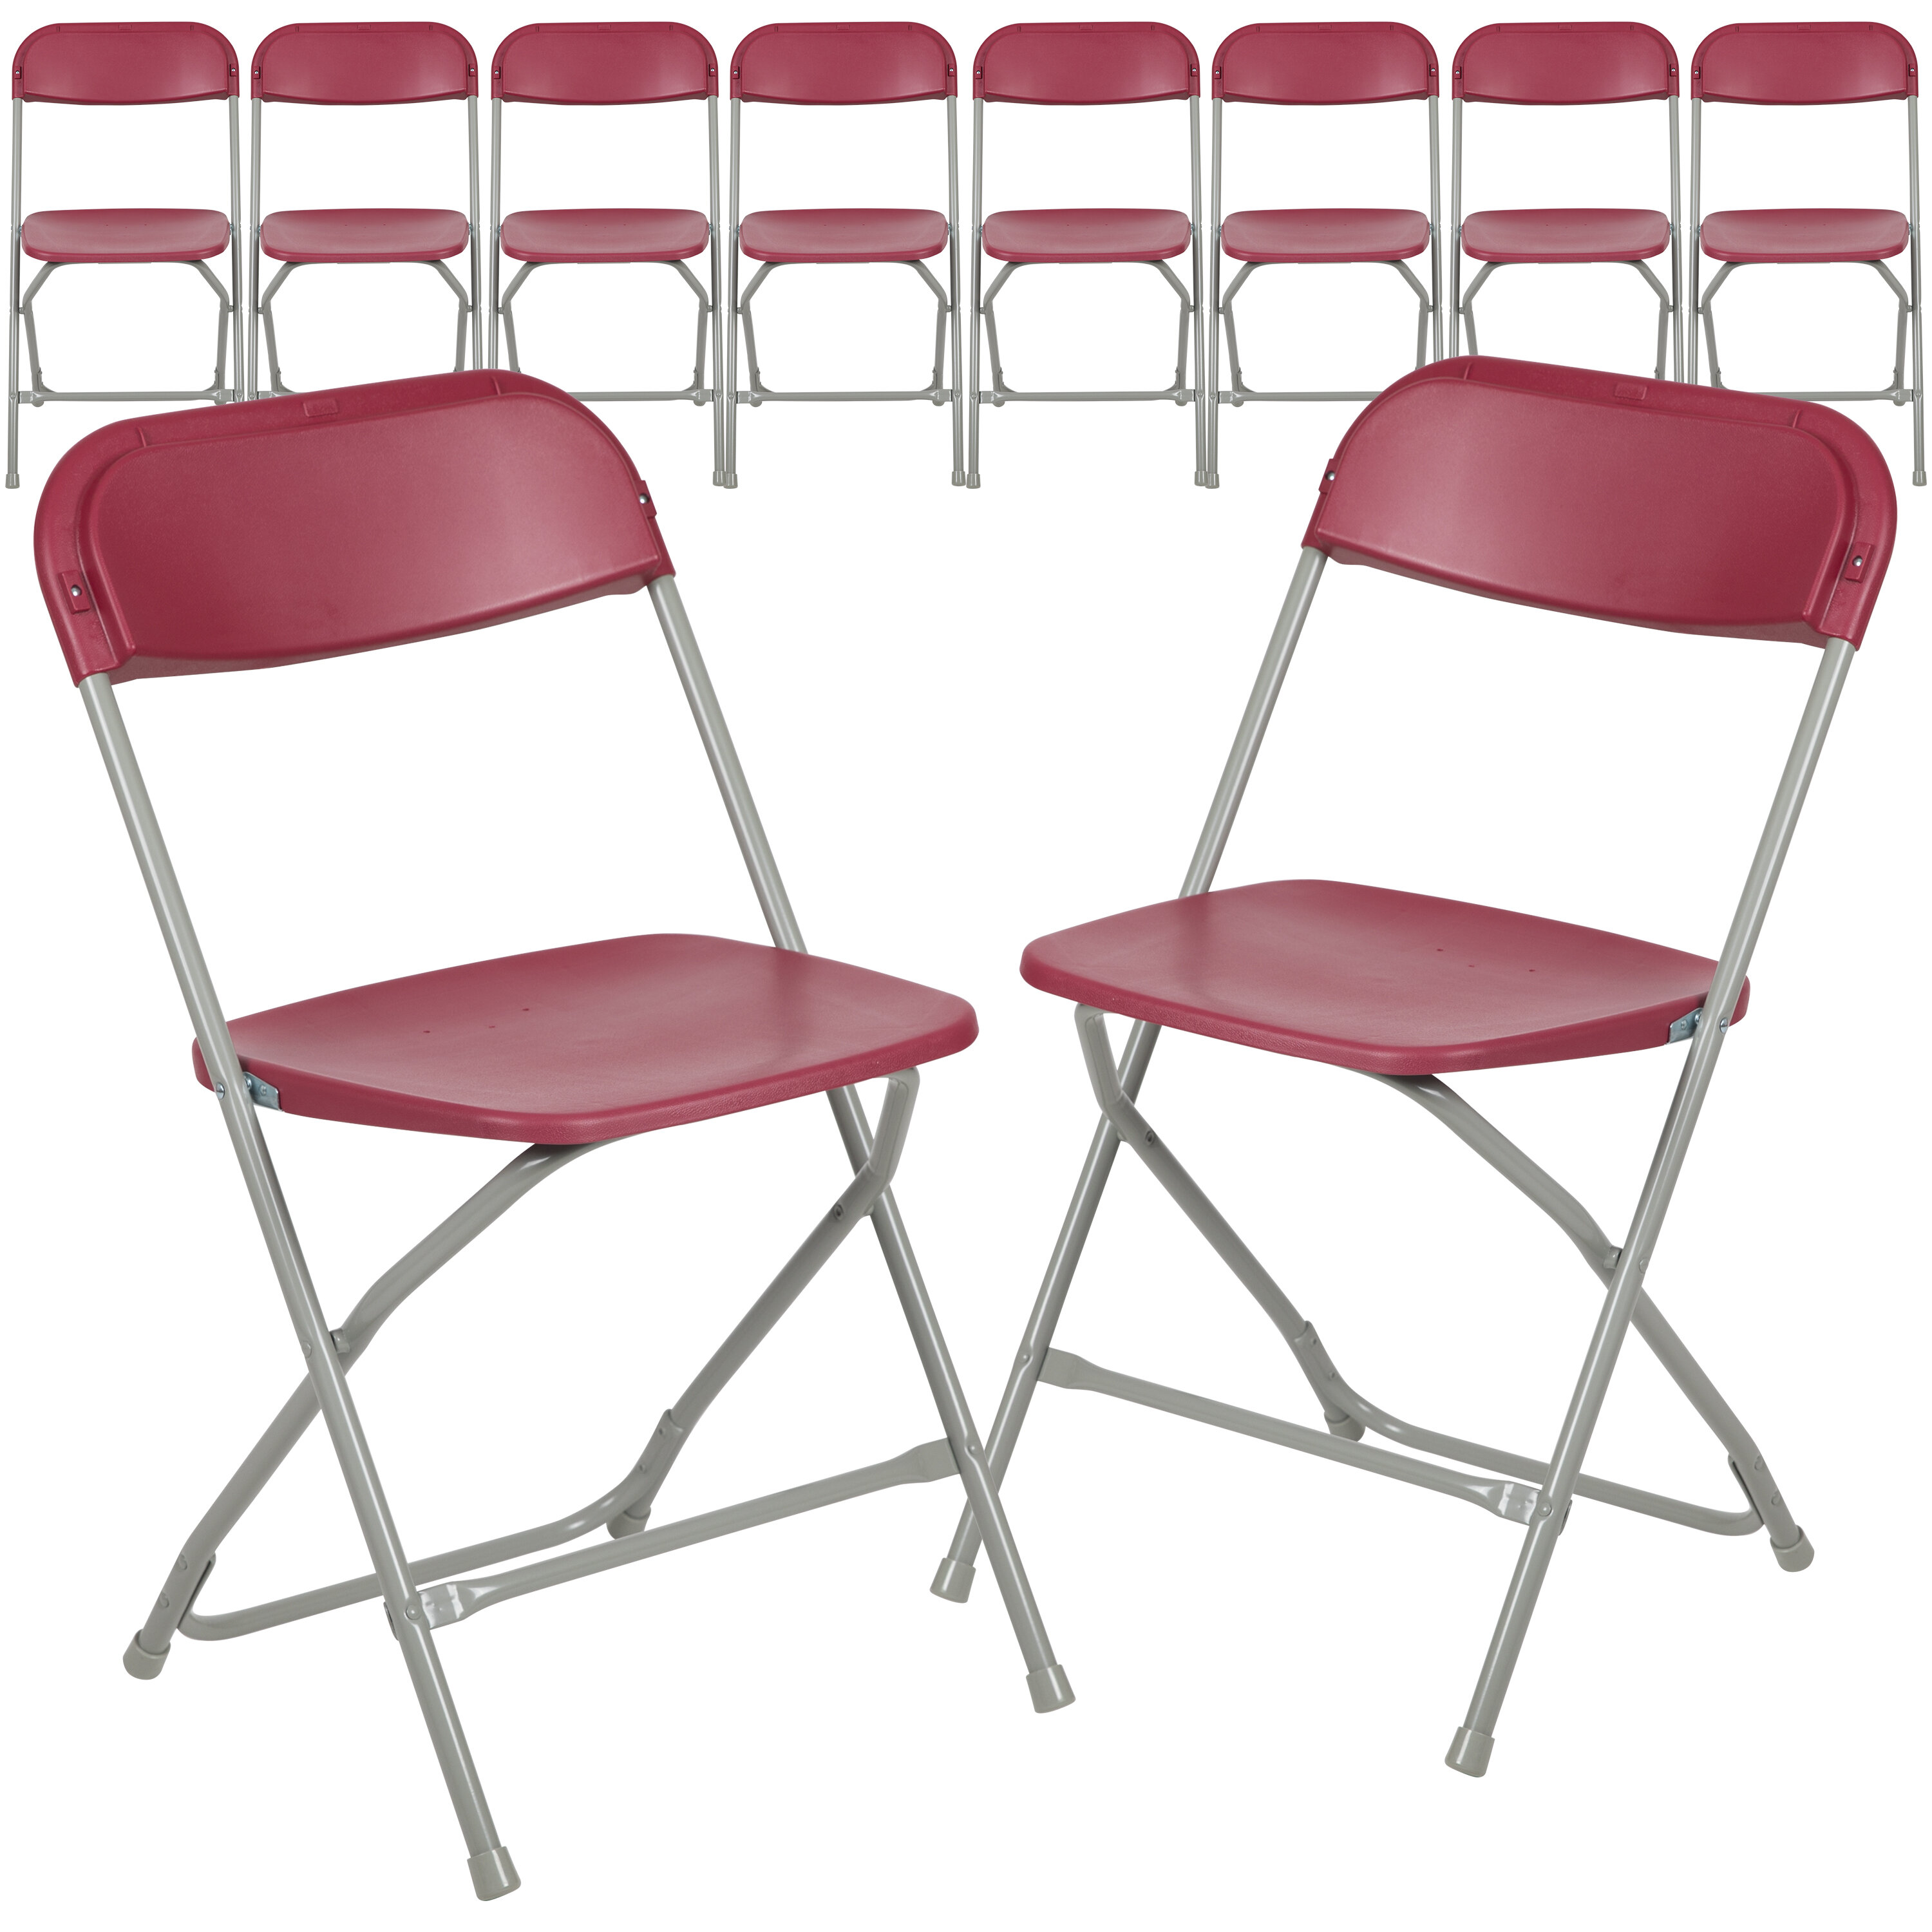 Lot of 20 Heavy Duty Red Metal Folding Chairs 